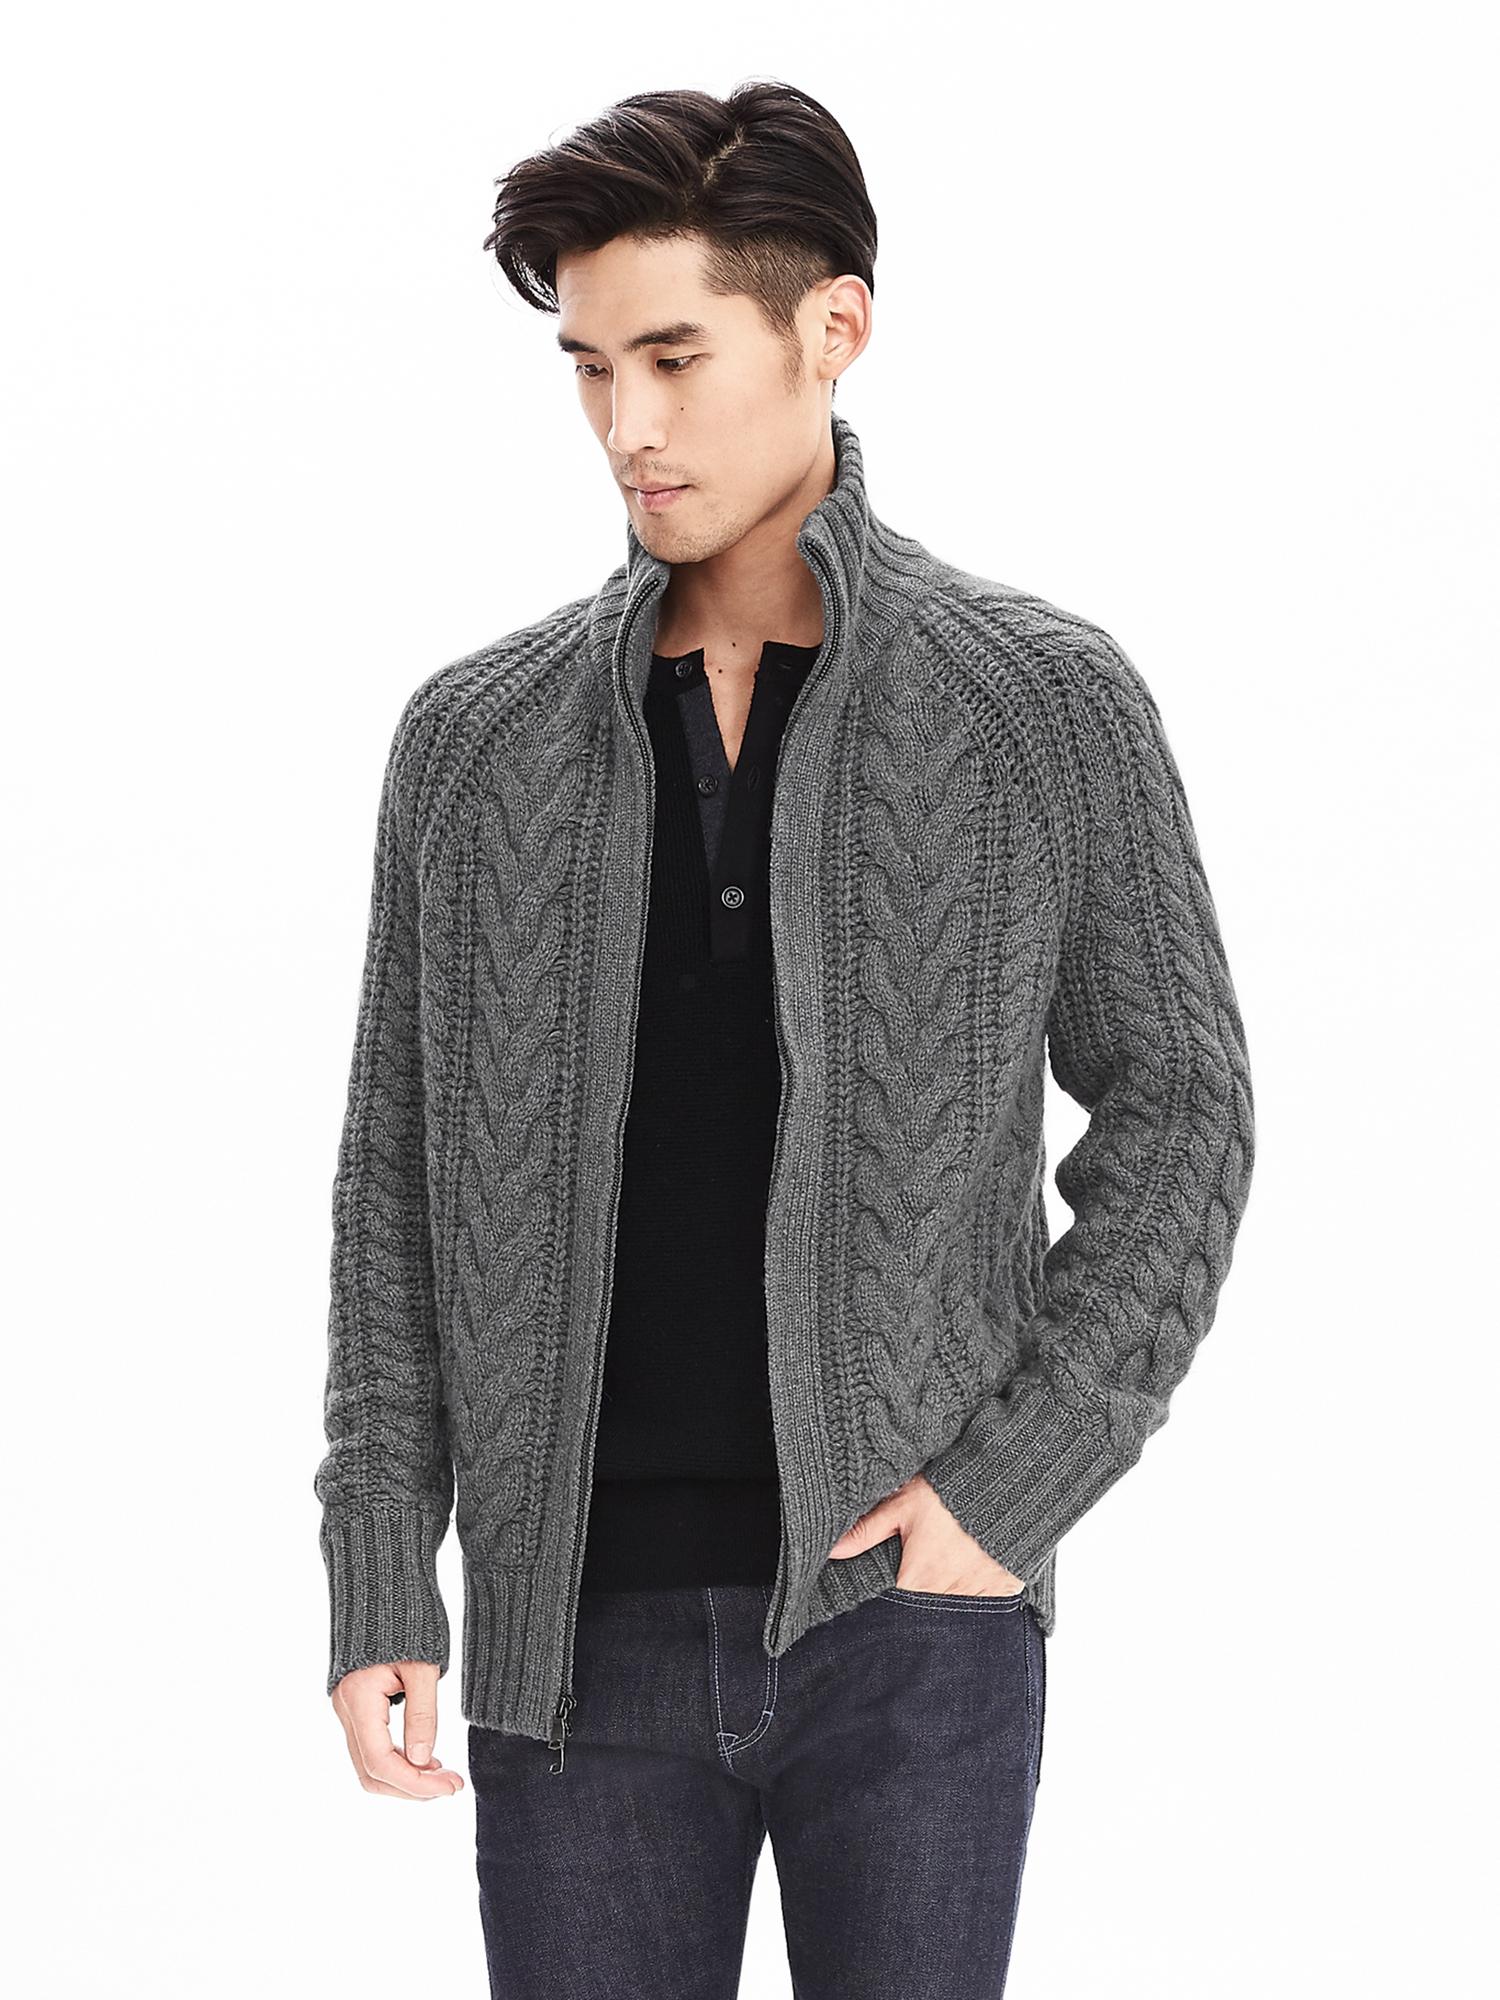 Todd & Duncan Cable-Knit Cashmere Zip Jacket